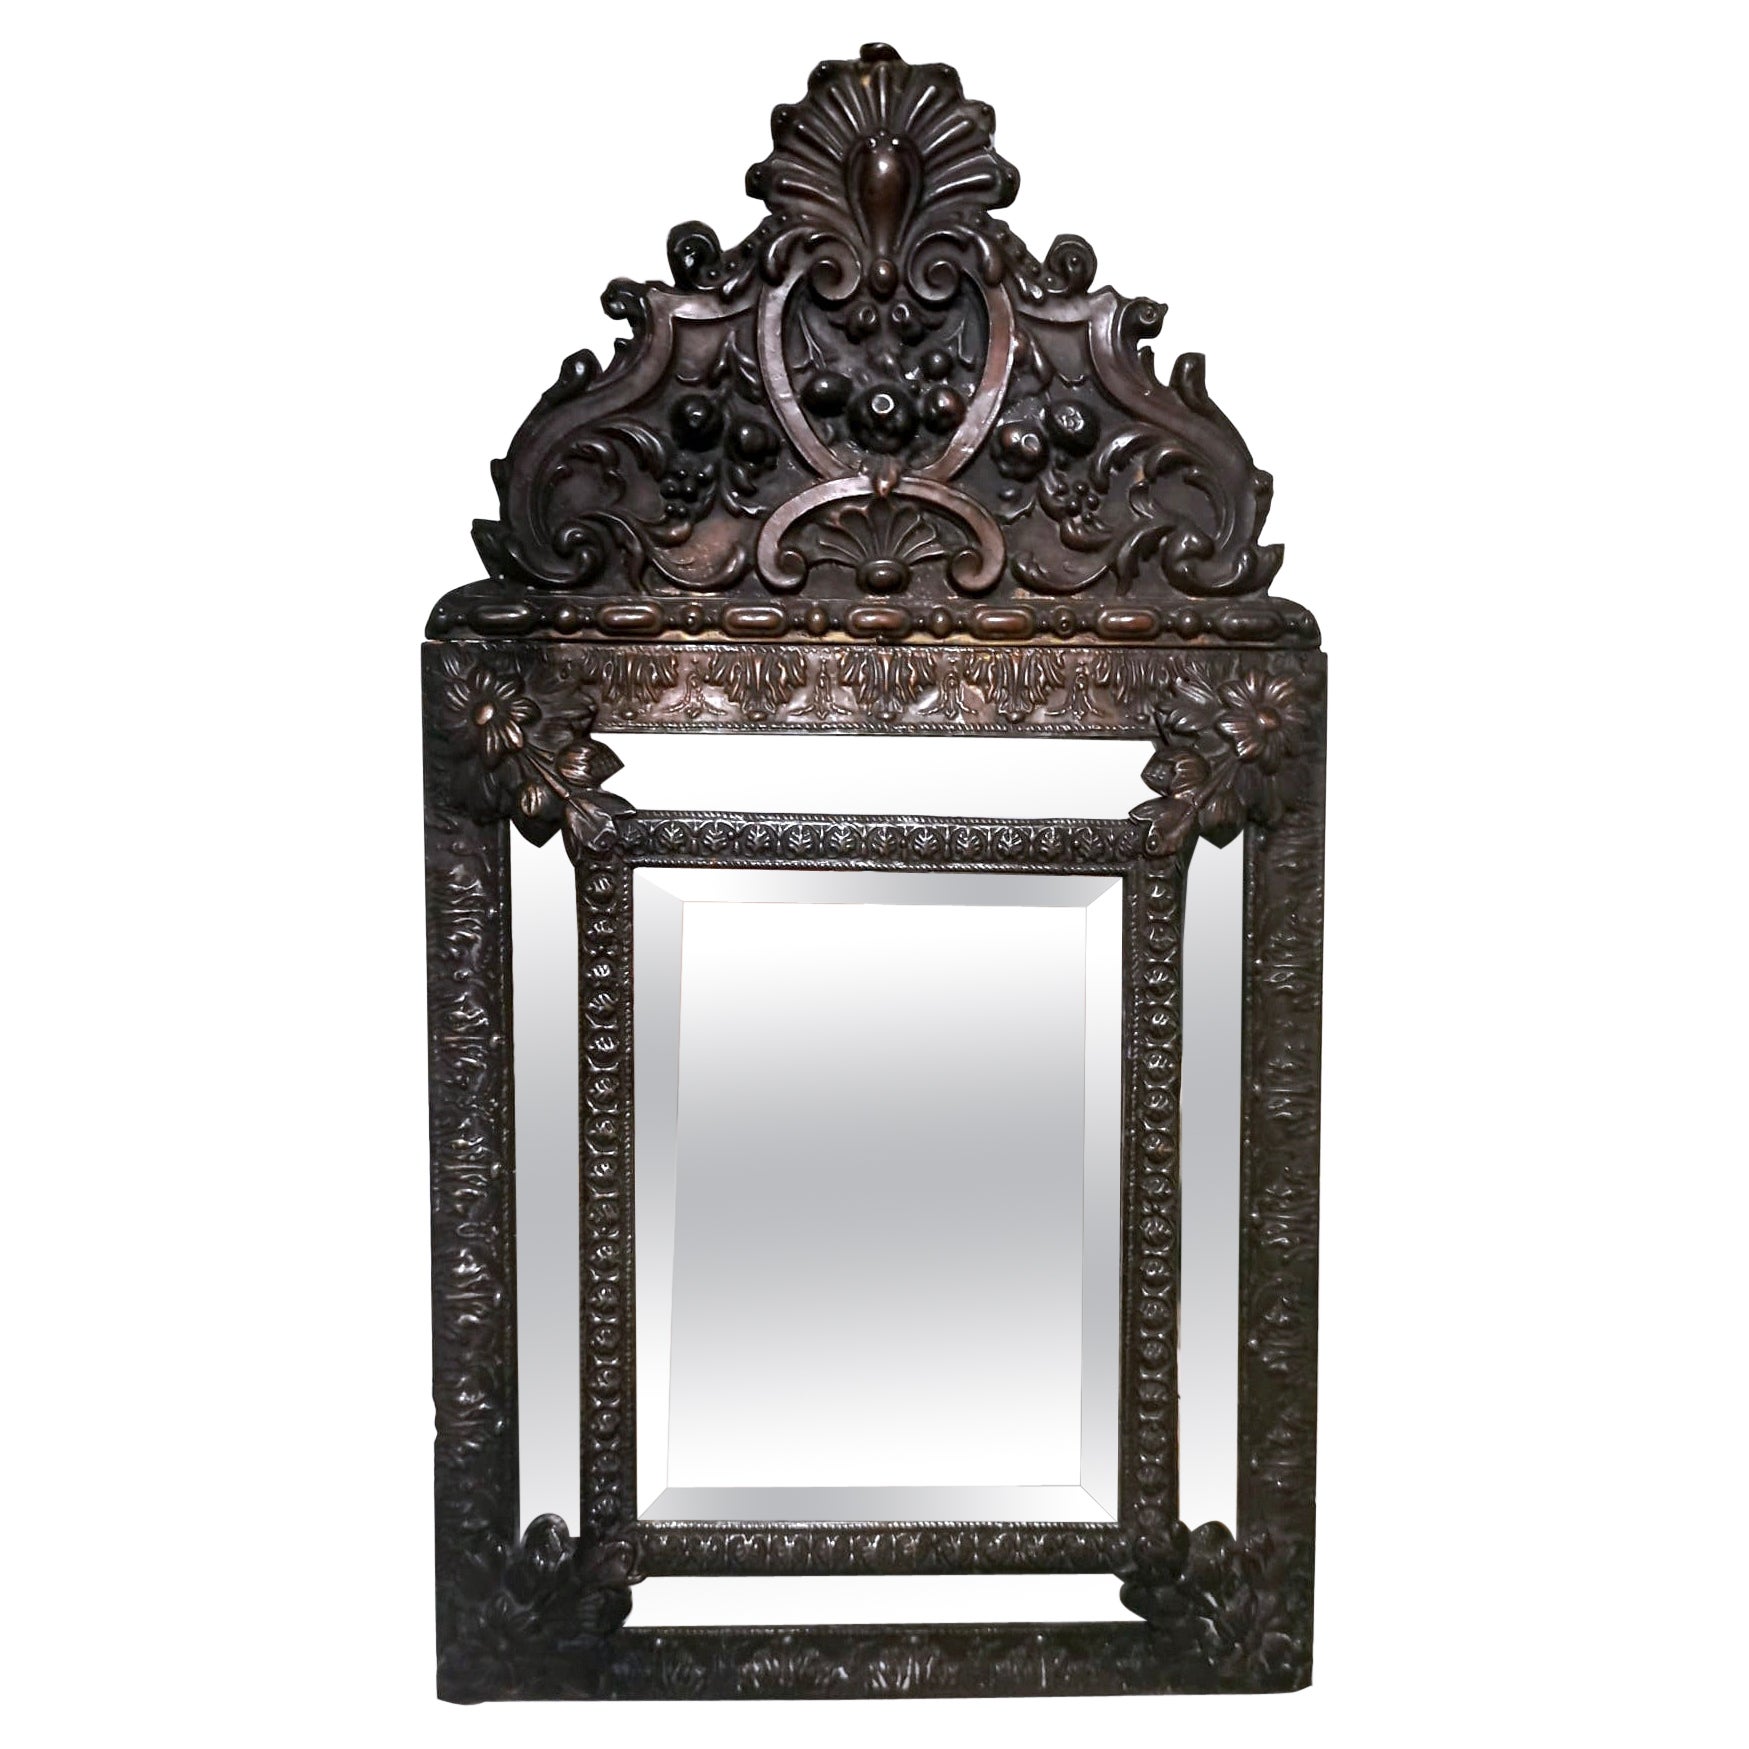 Napoleon III Style Wall Mirror In Burnished Brass "Repoussé" Workmanship